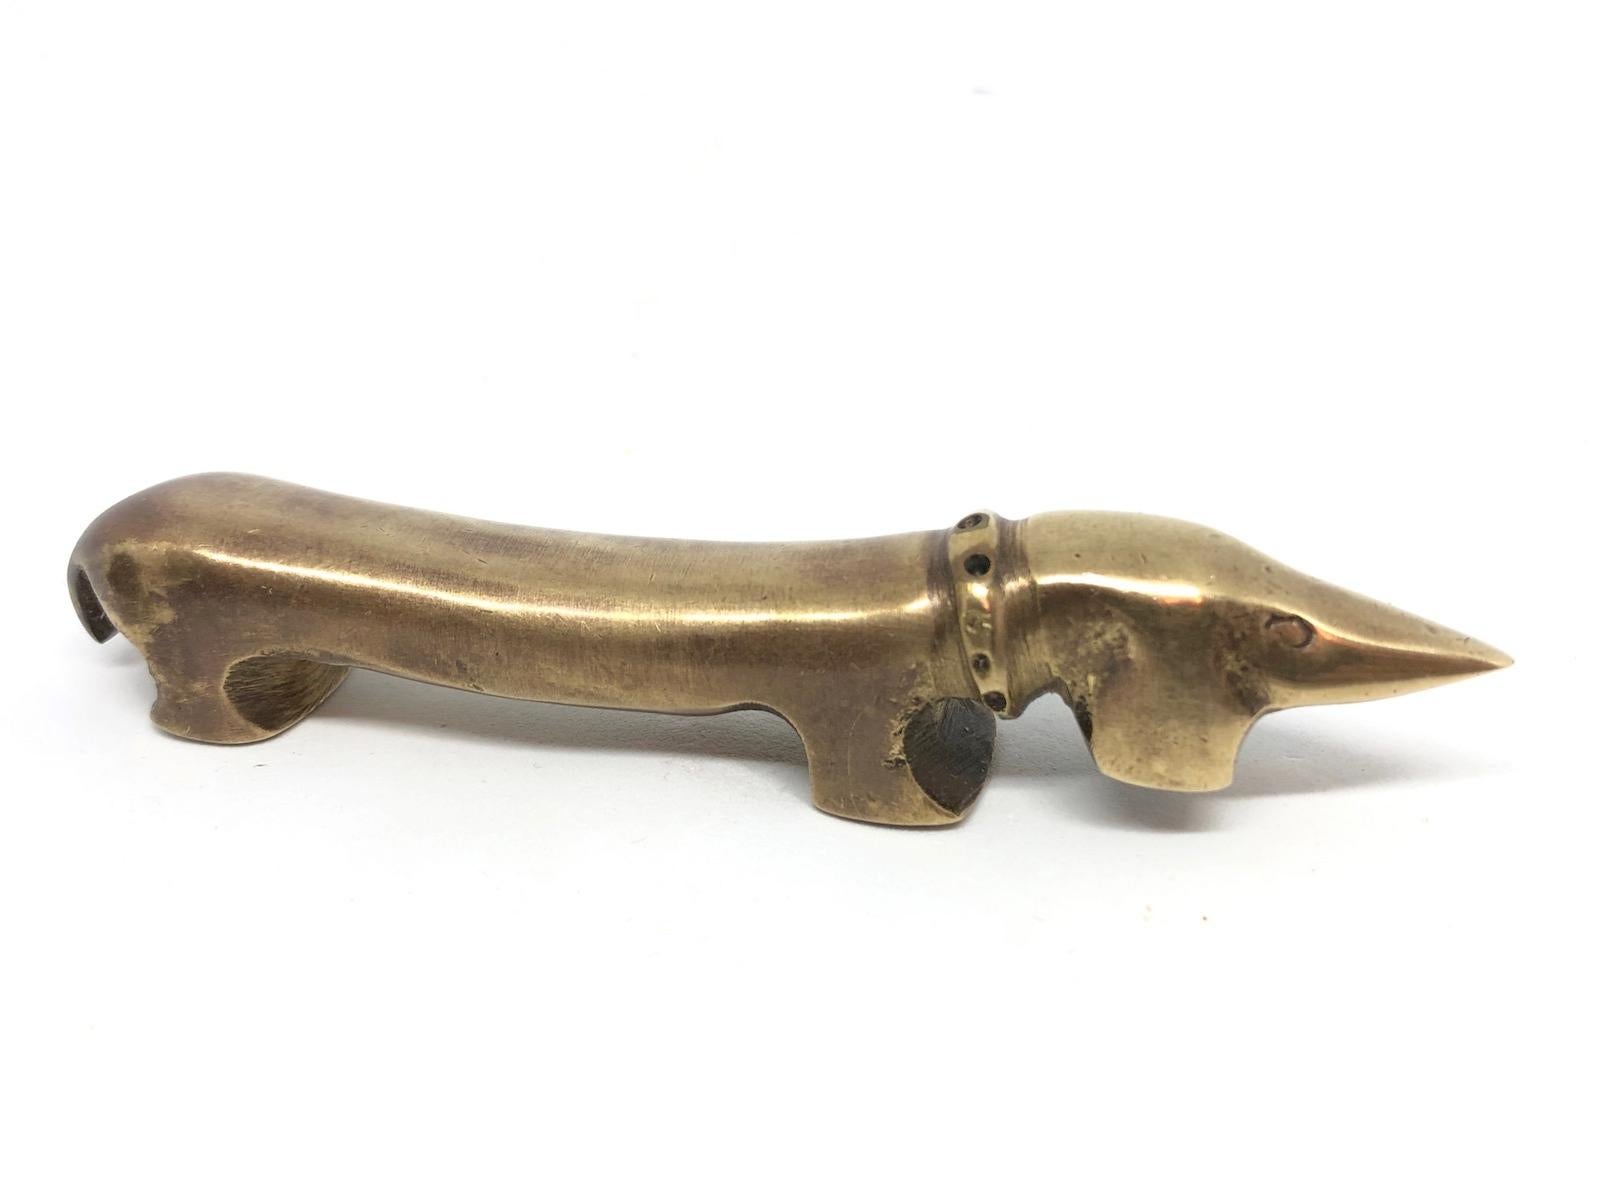 Classic early 1950s Austrian bottle opener, attributed to be designed by Ludwig Bemelmans showing 